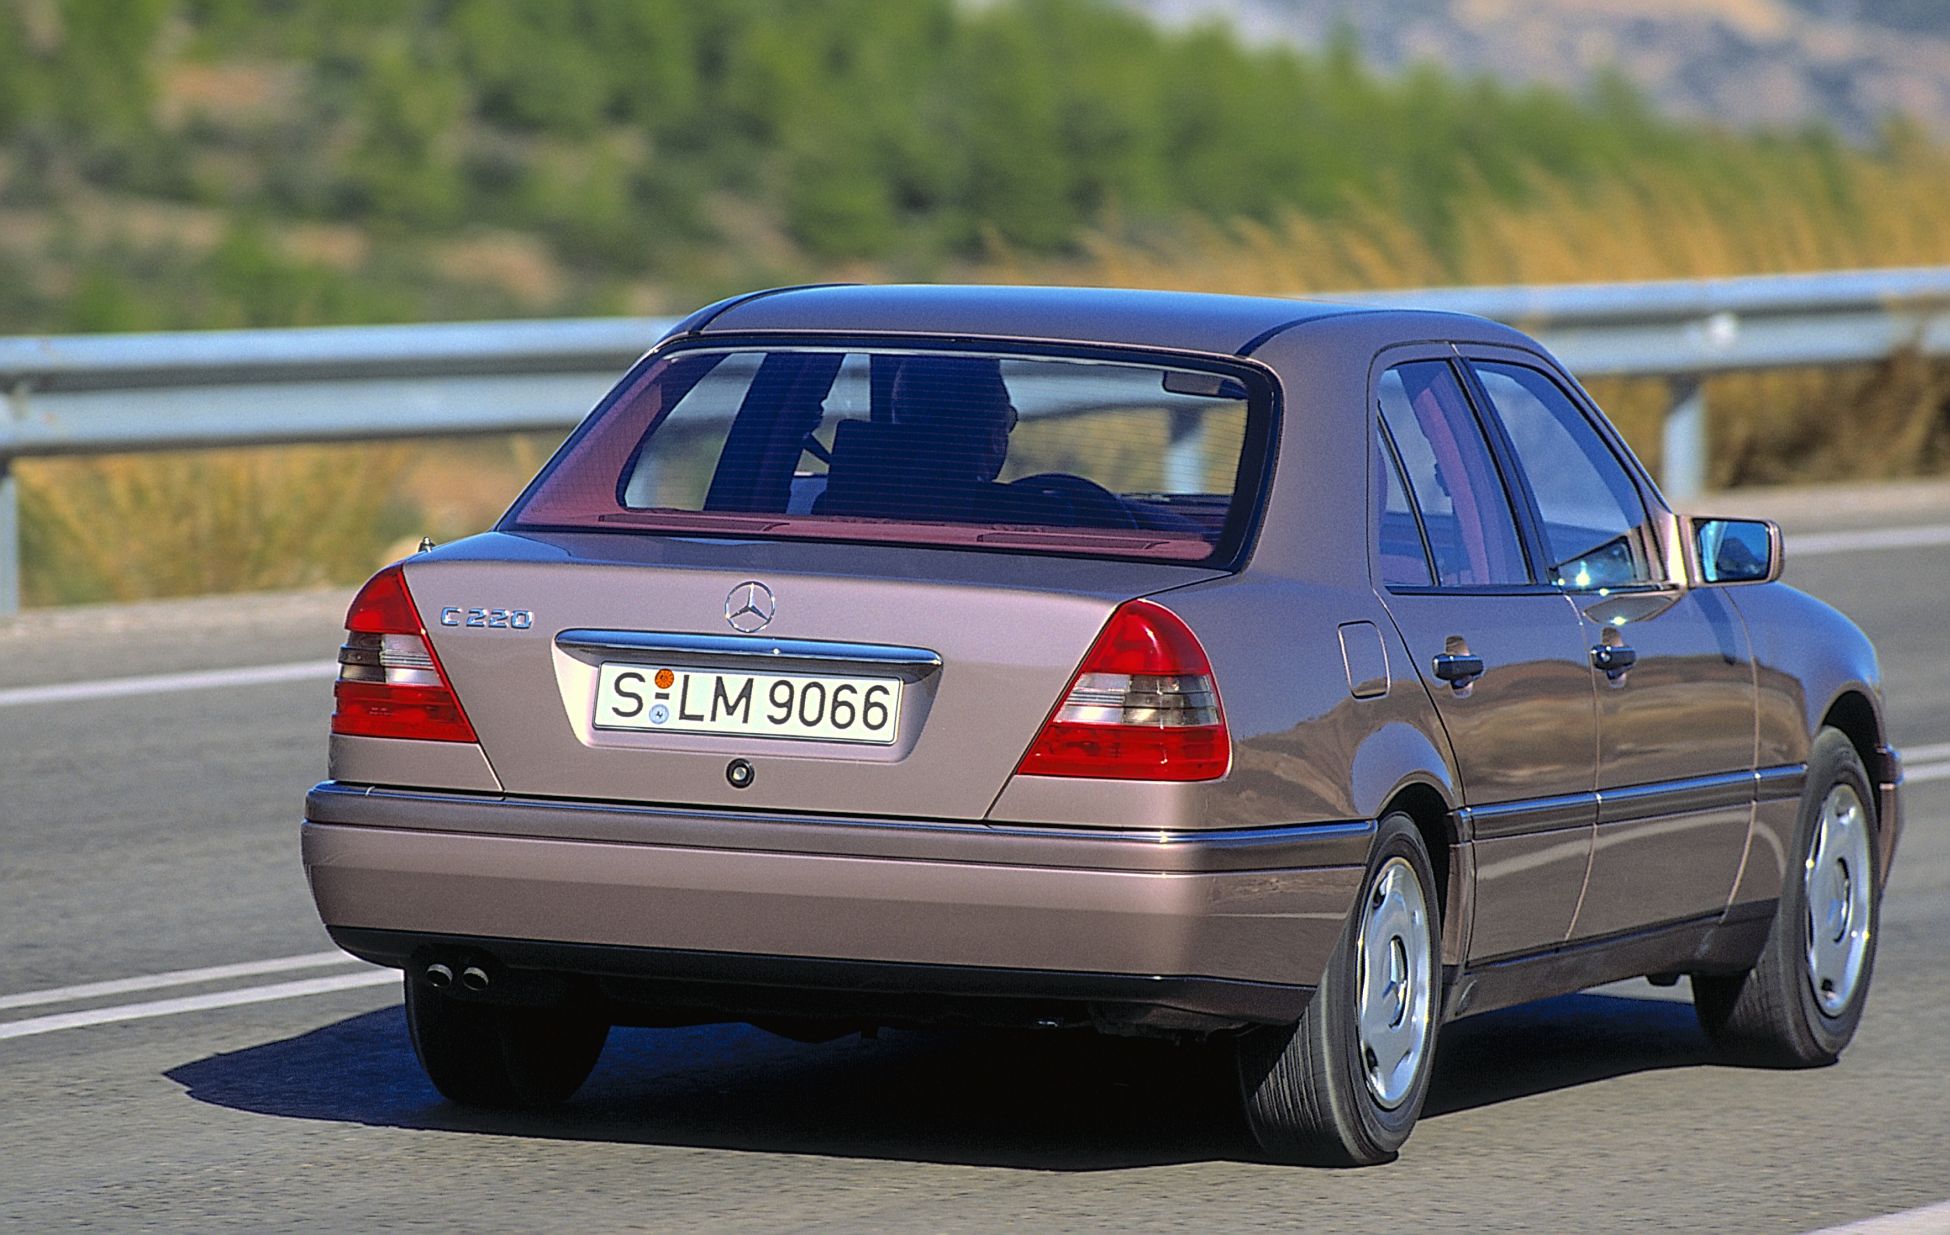 Mercedes Benz C Class W202: Most Up-to-Date Encyclopedia, News